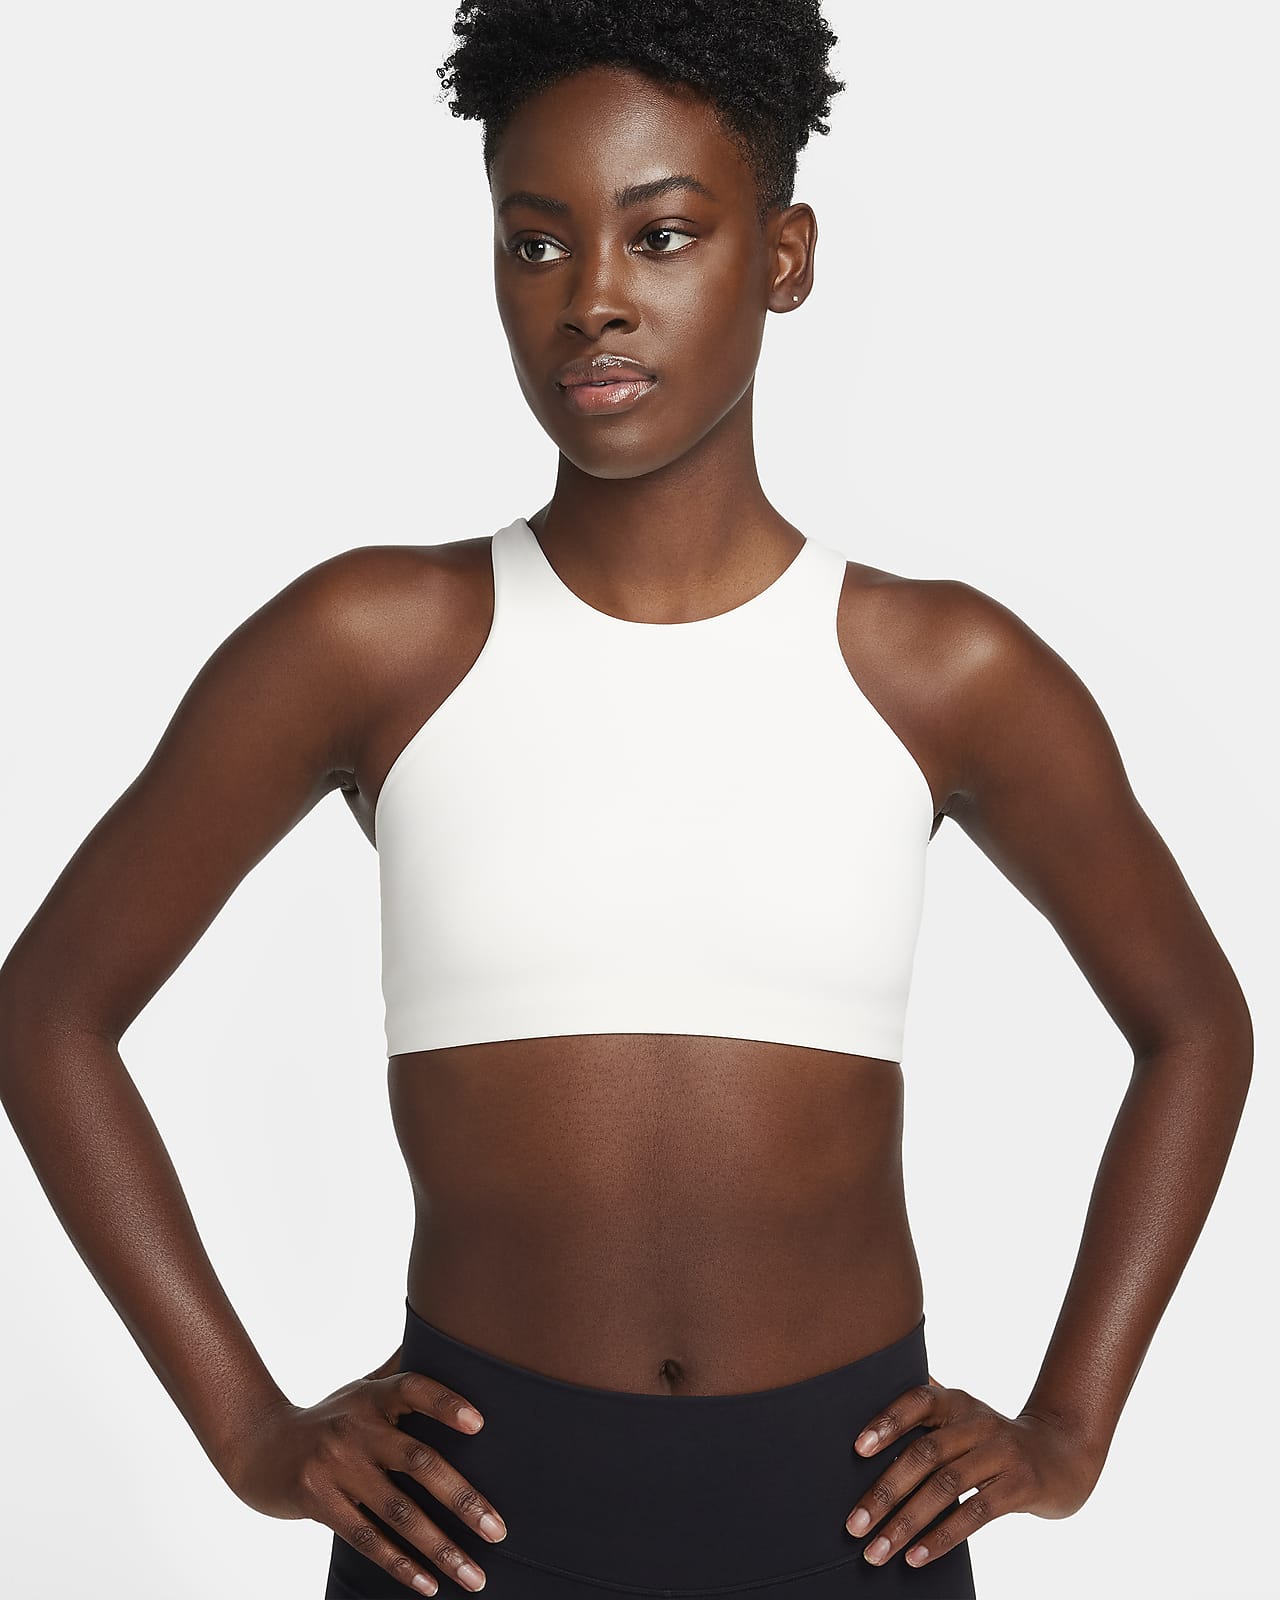 Nike Launches Maternity Collection Including Nursing Sports Bra